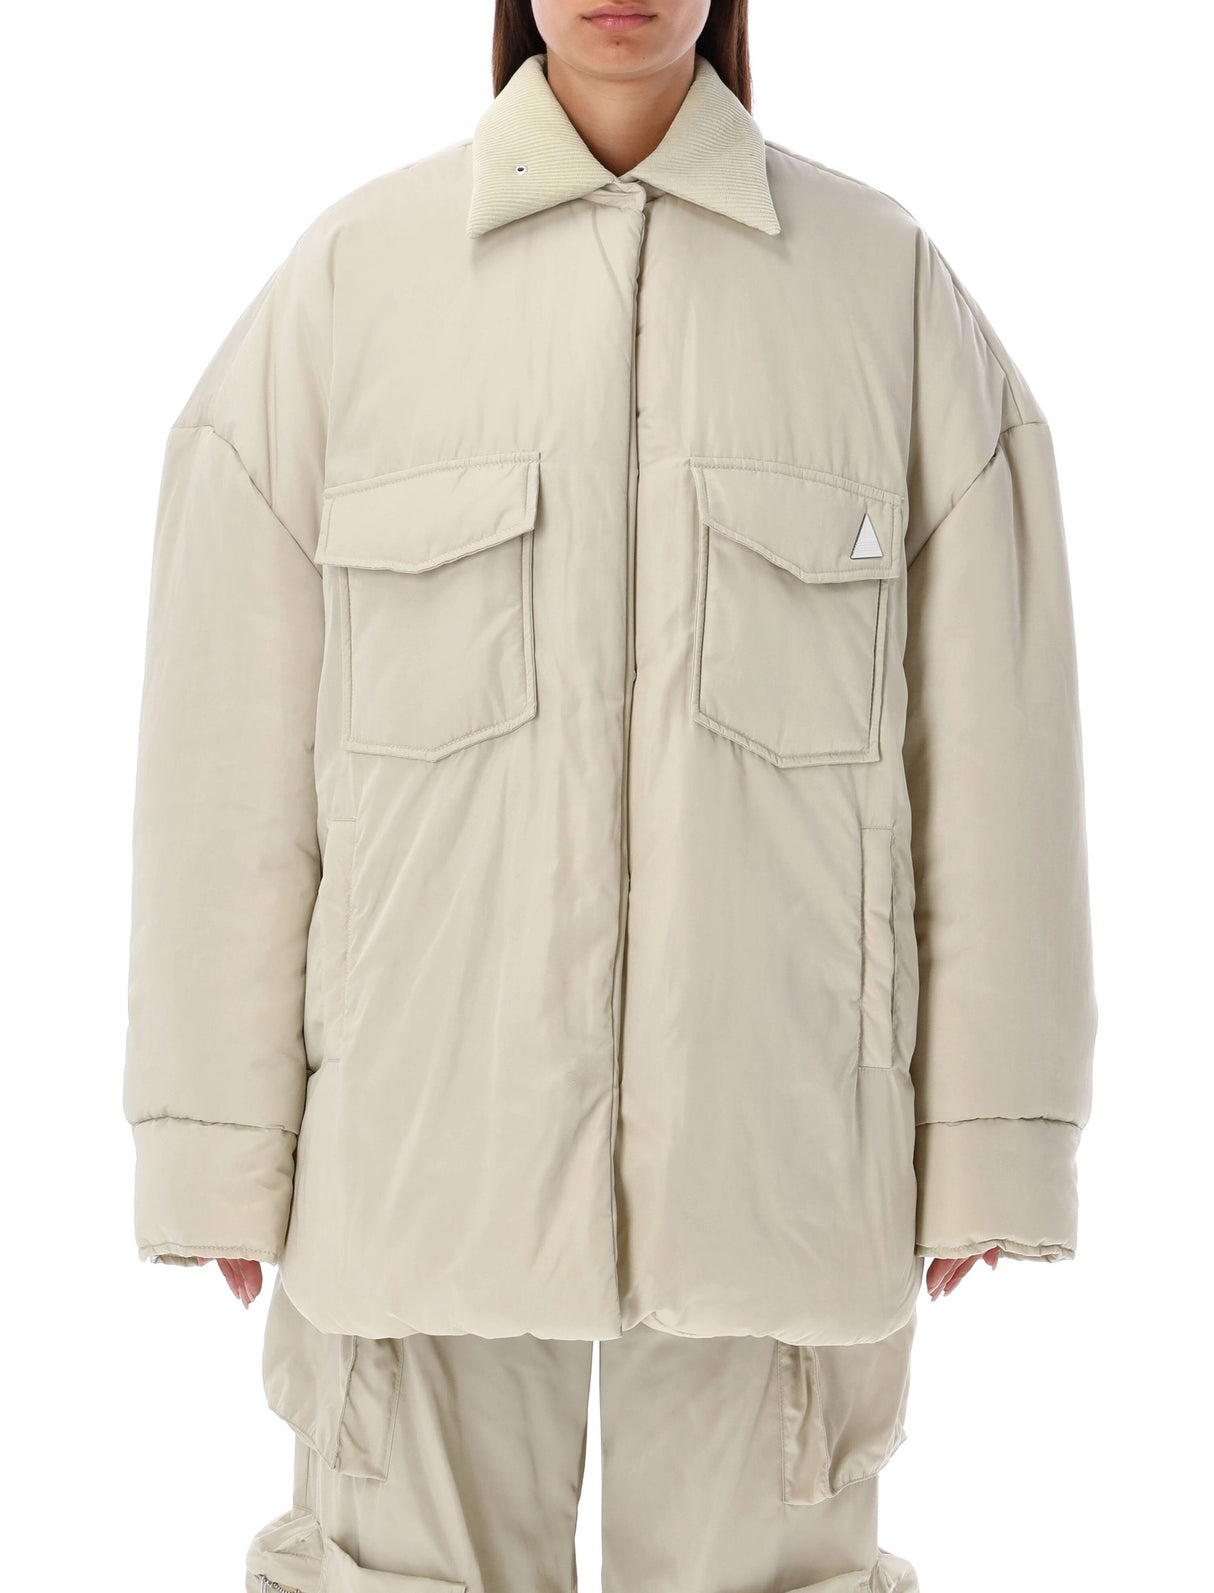 THE ATTICO The Oversized White Overjacket for Women - FW23 Collection